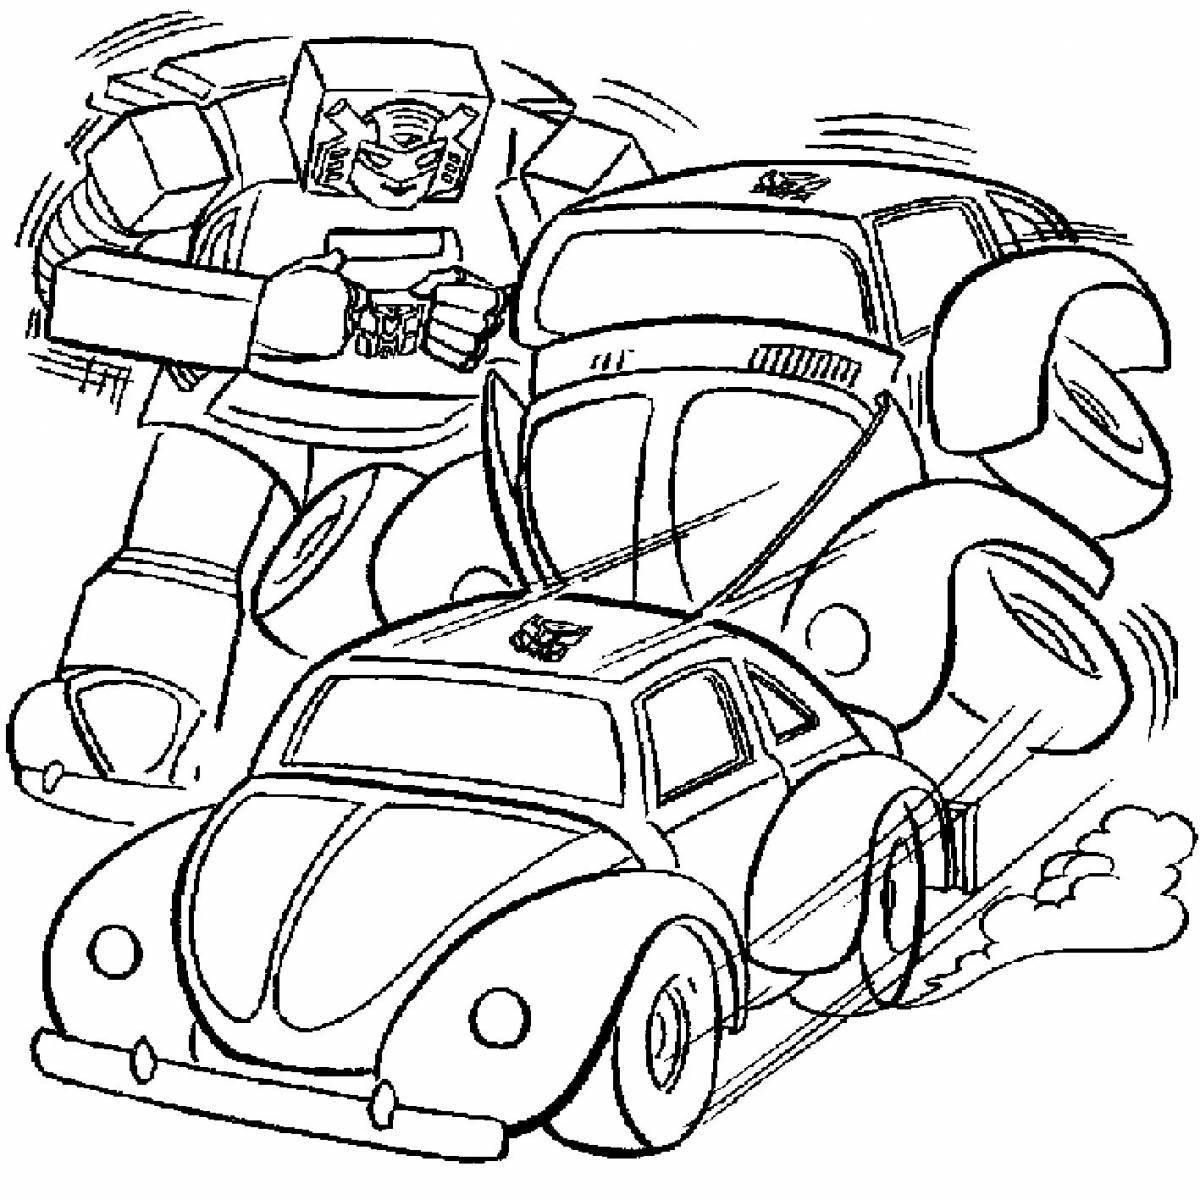 Colouring colorful cars transformers